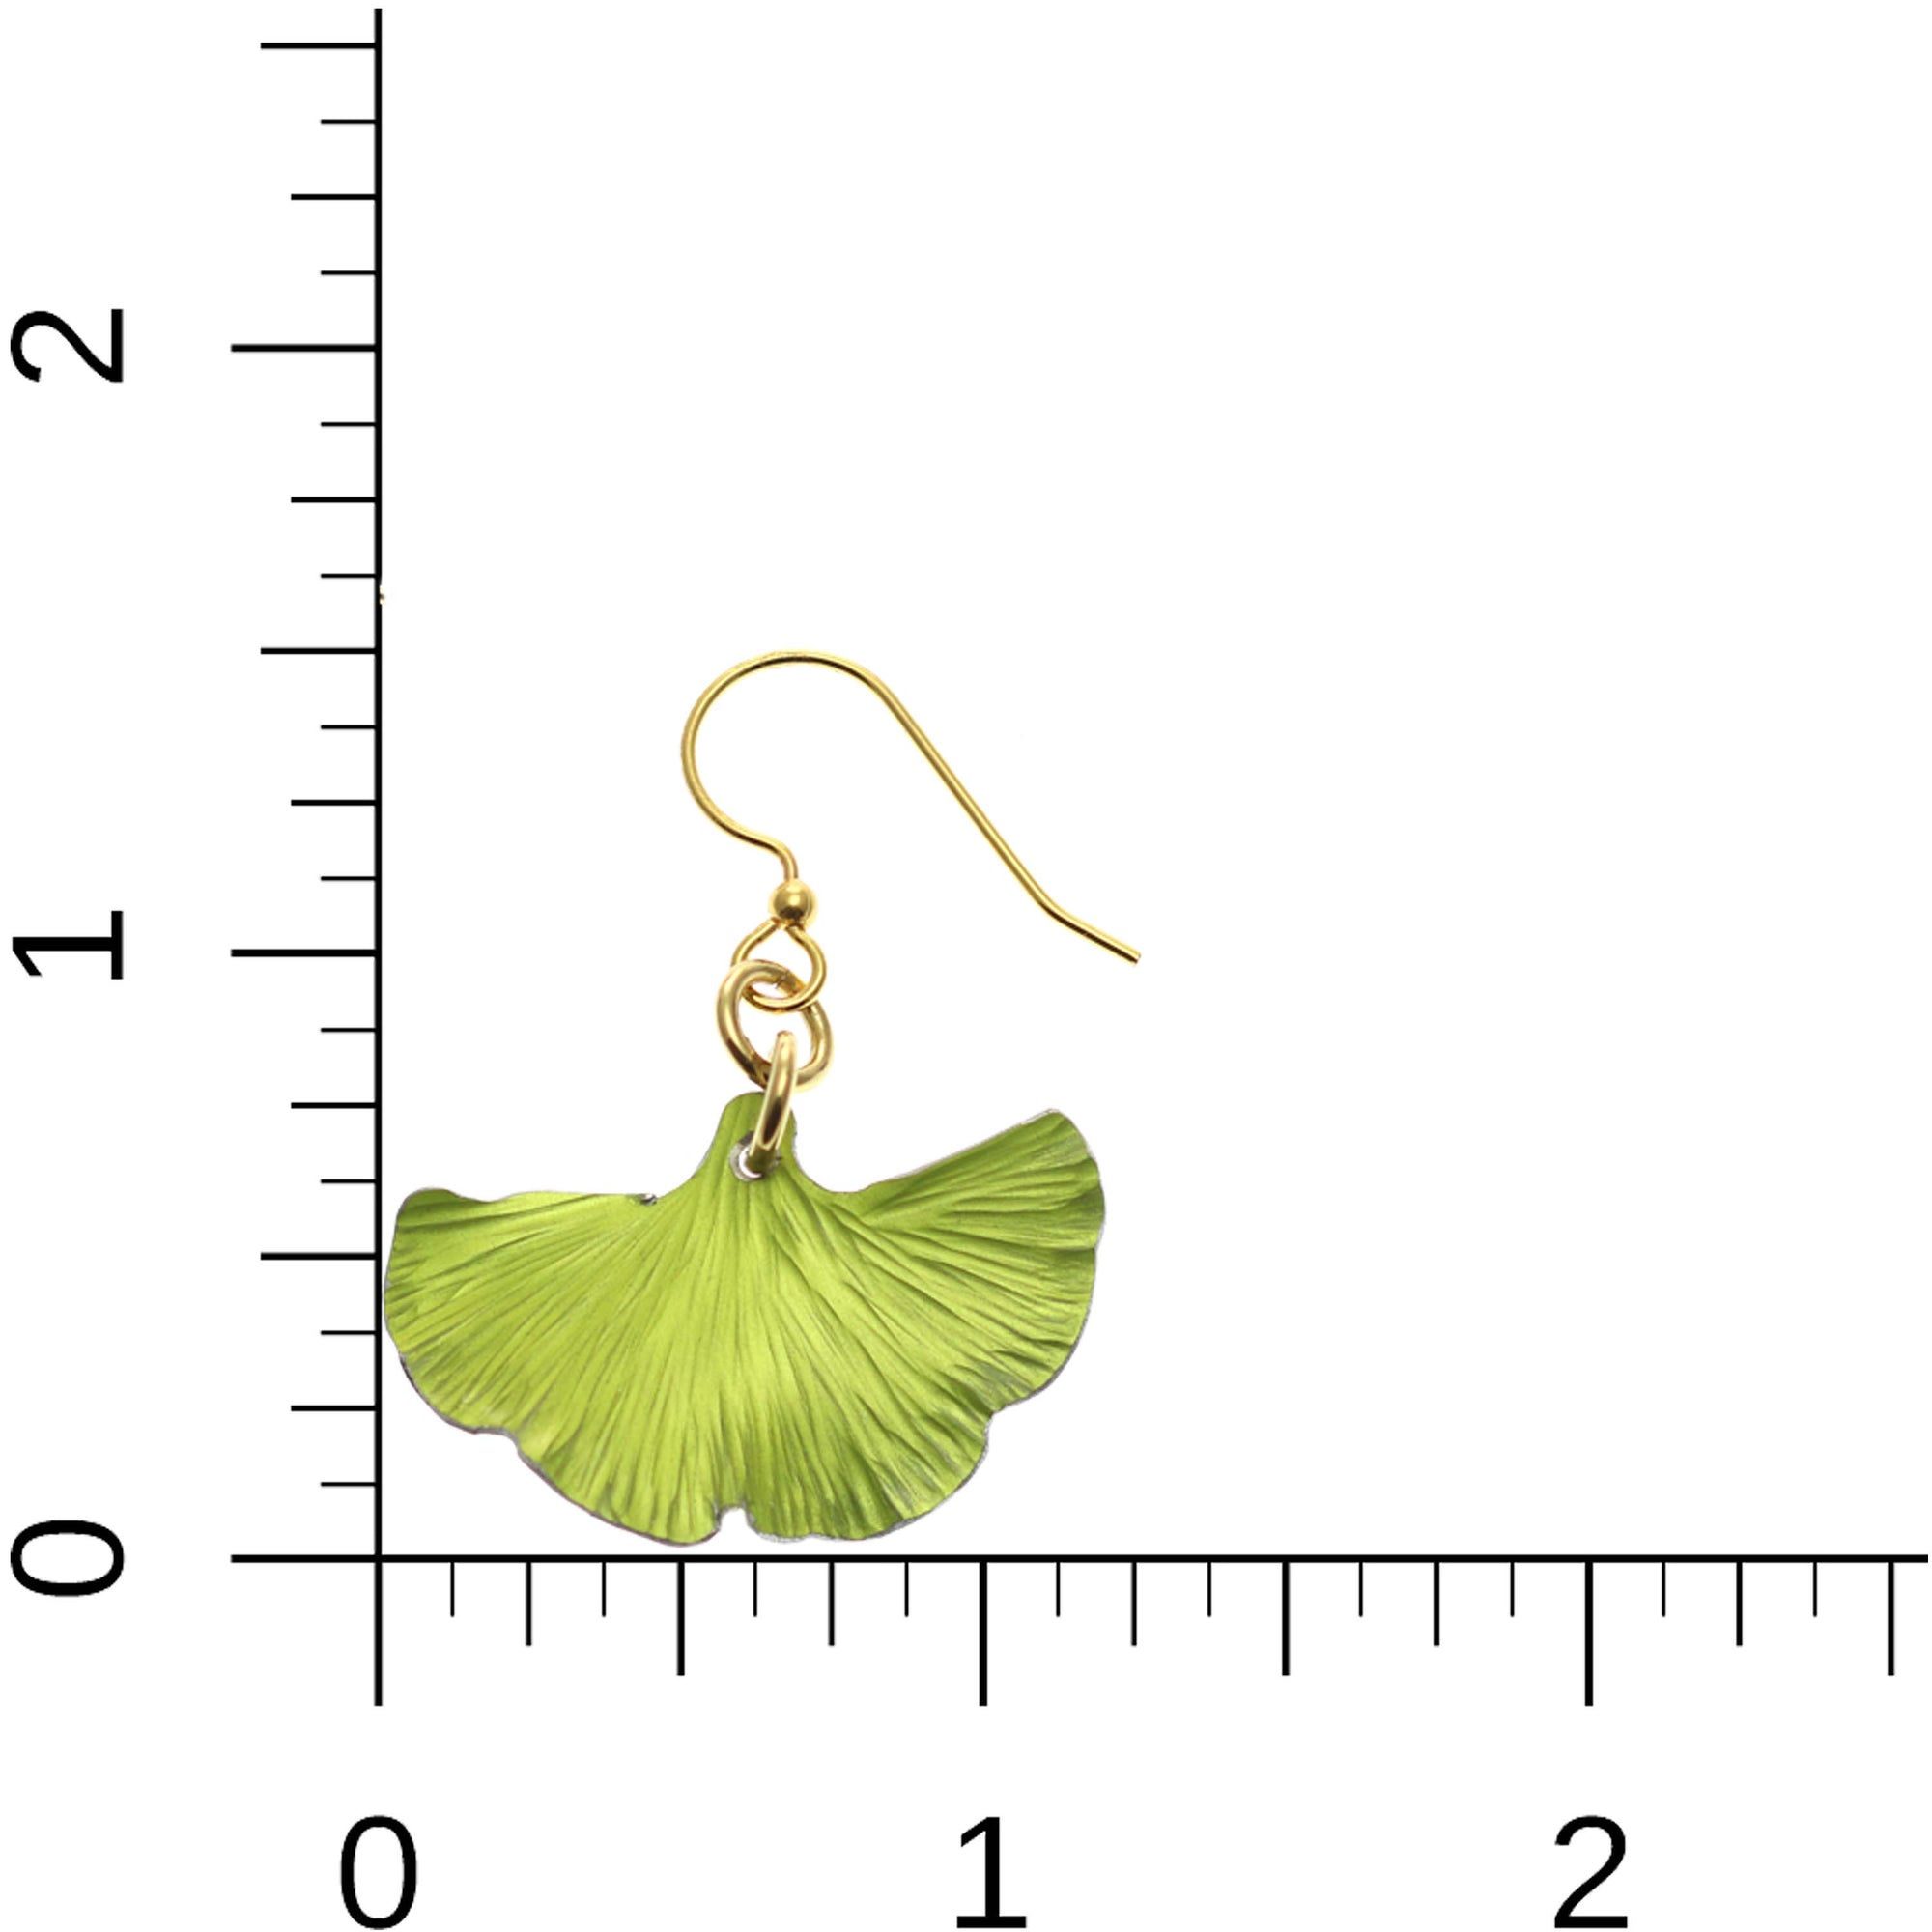 Small Ginkgo Leaf Anodized Aluminum Sour Candy Apple Earrings on Ruler for Size and Scale